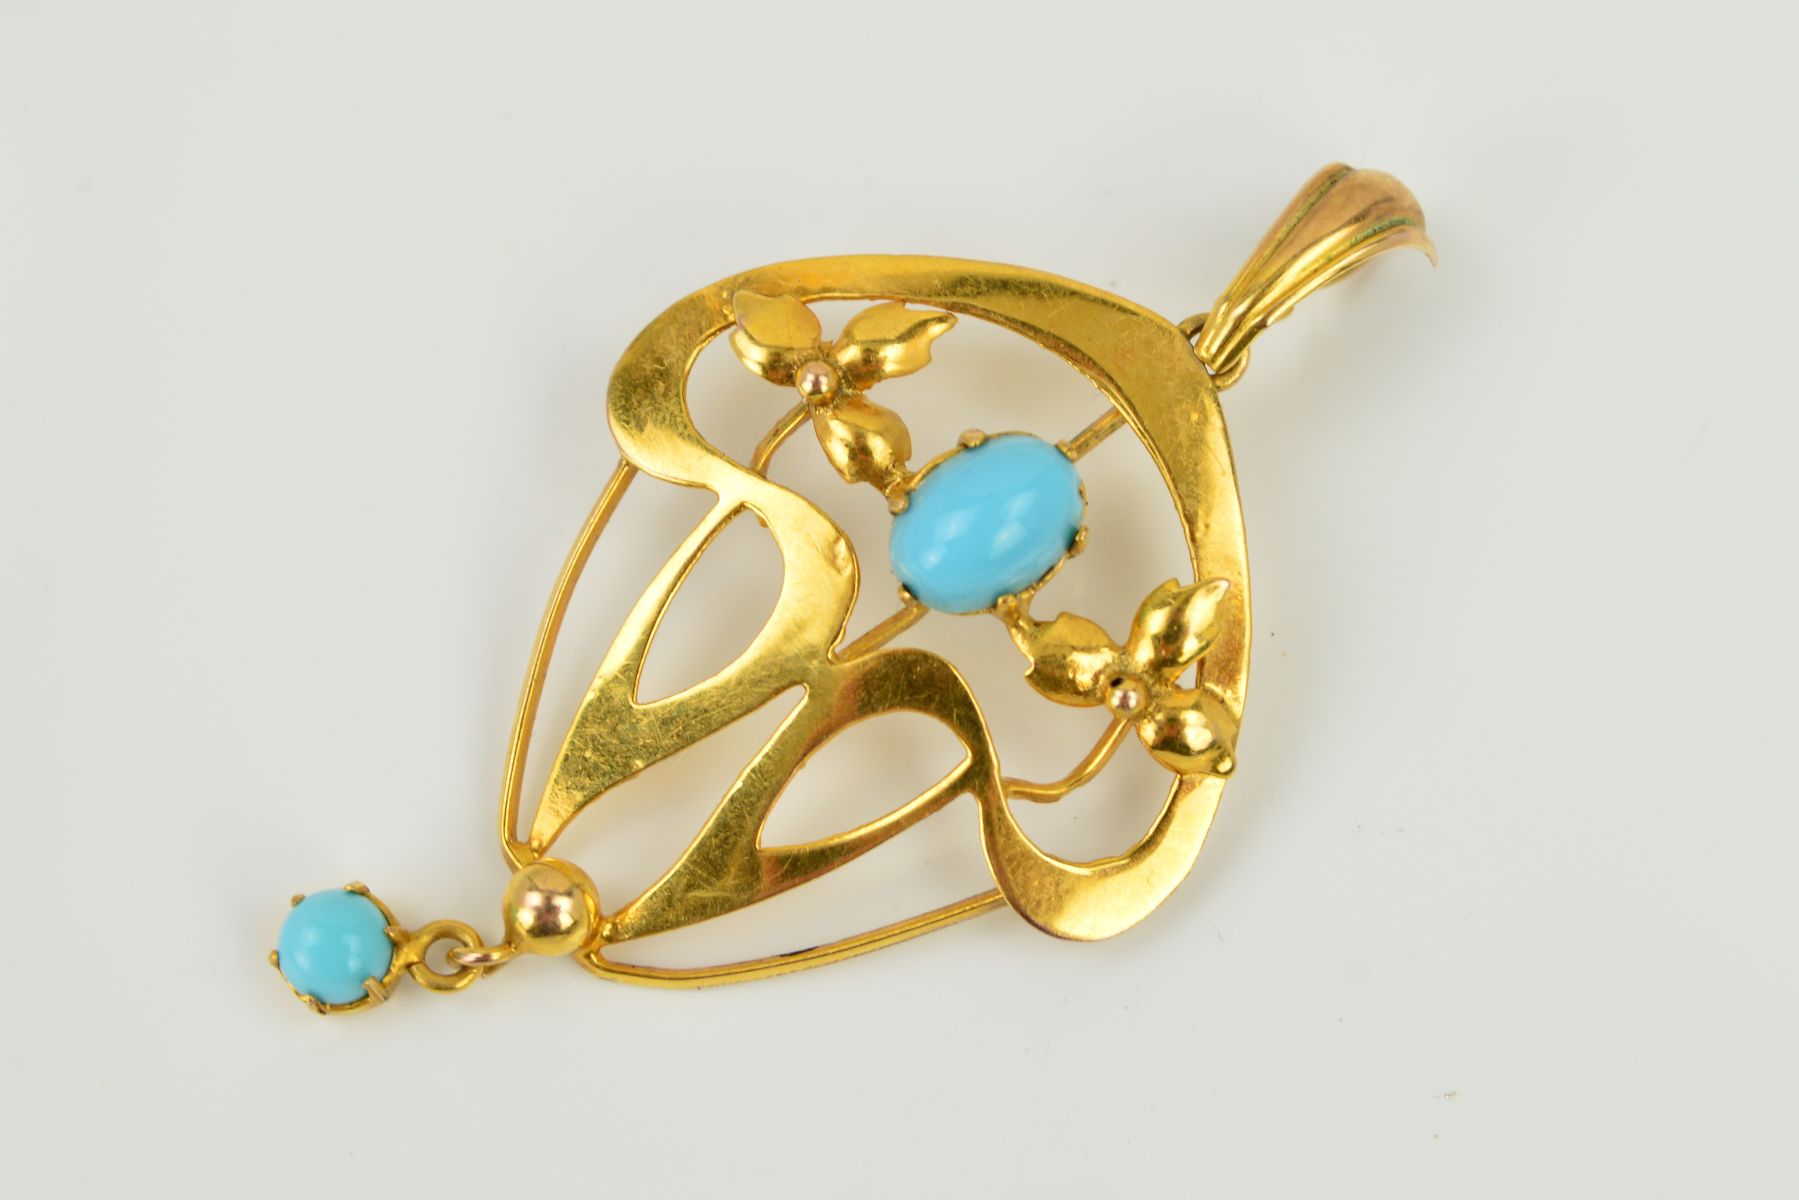 AN OPENWORK PENDANT of scrolling openwork design with foliate detail, set with an oval blue paste